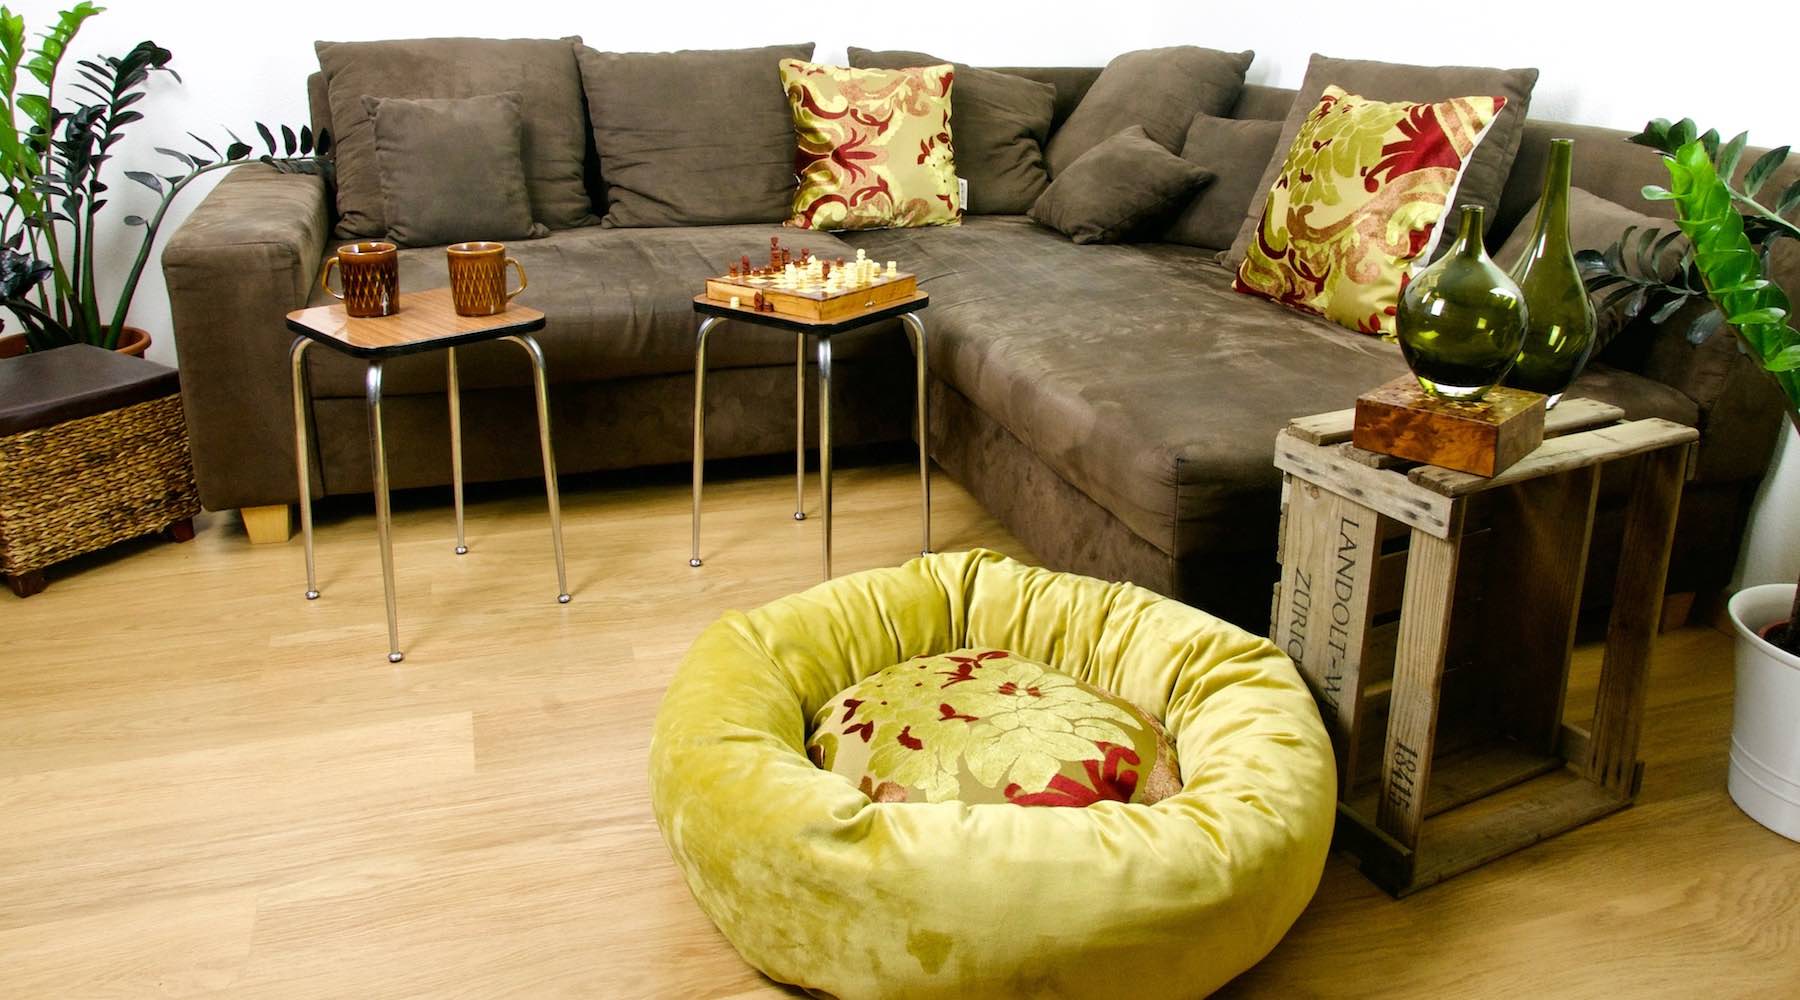 Red golden unique Fluffikon donut dog bed in an stylish living room. Two decorative pillows on the couch are made from the same material as the calming dog bed.